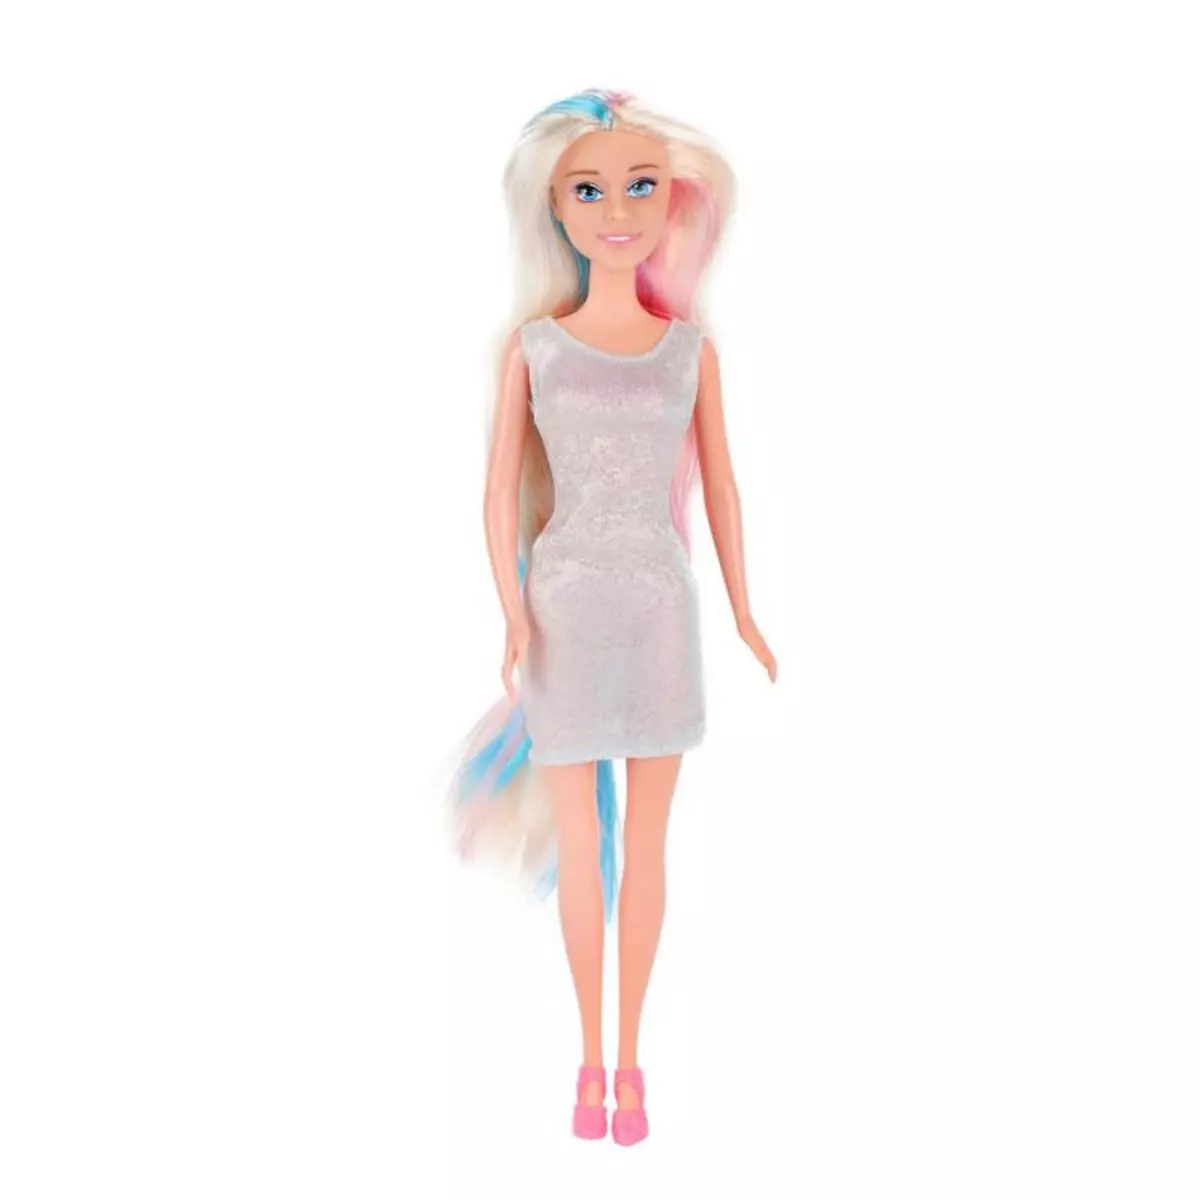  Lauren Teen Doll with Hair Extensions and Outfits 04117A